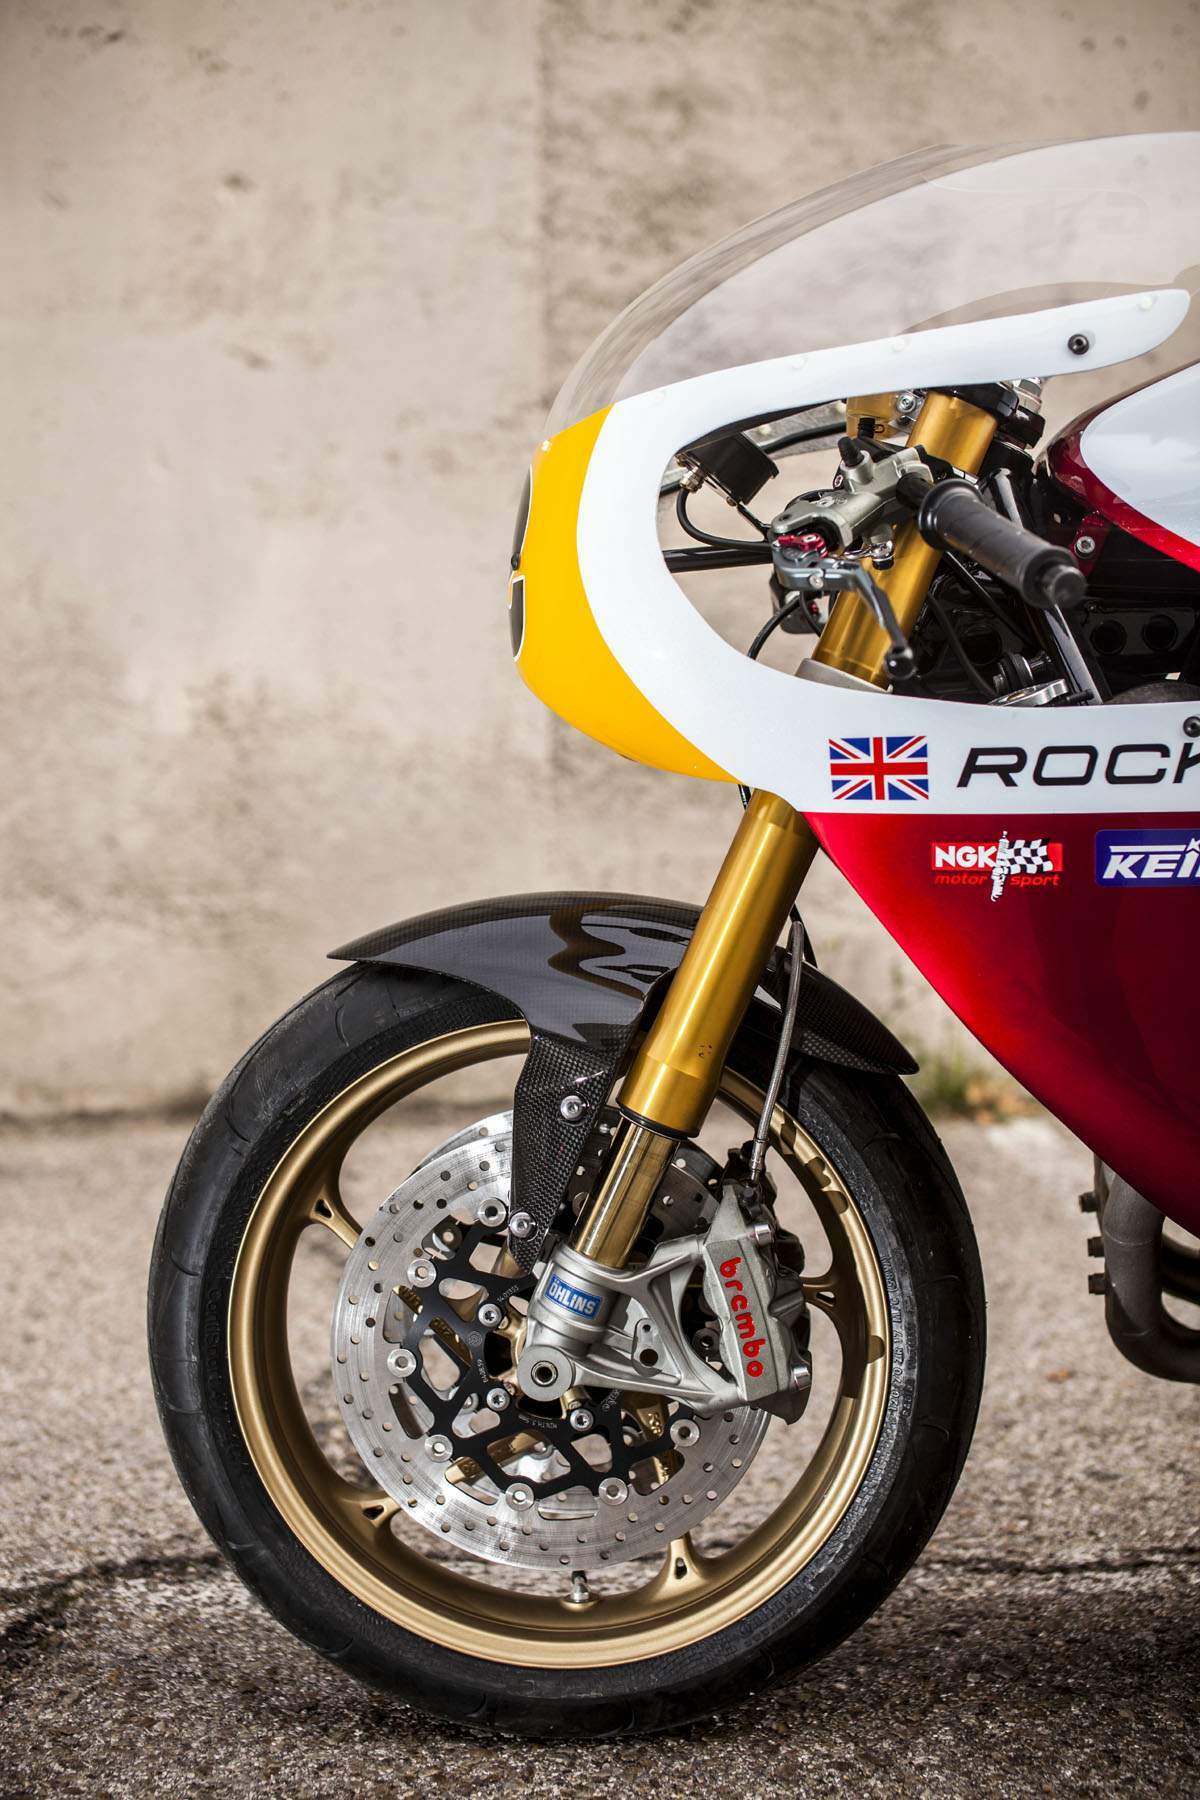 Triumph Legend TT 900 Racer “Rocket III” by XTR 
				Pepo For Sale Specifications, Price and Images